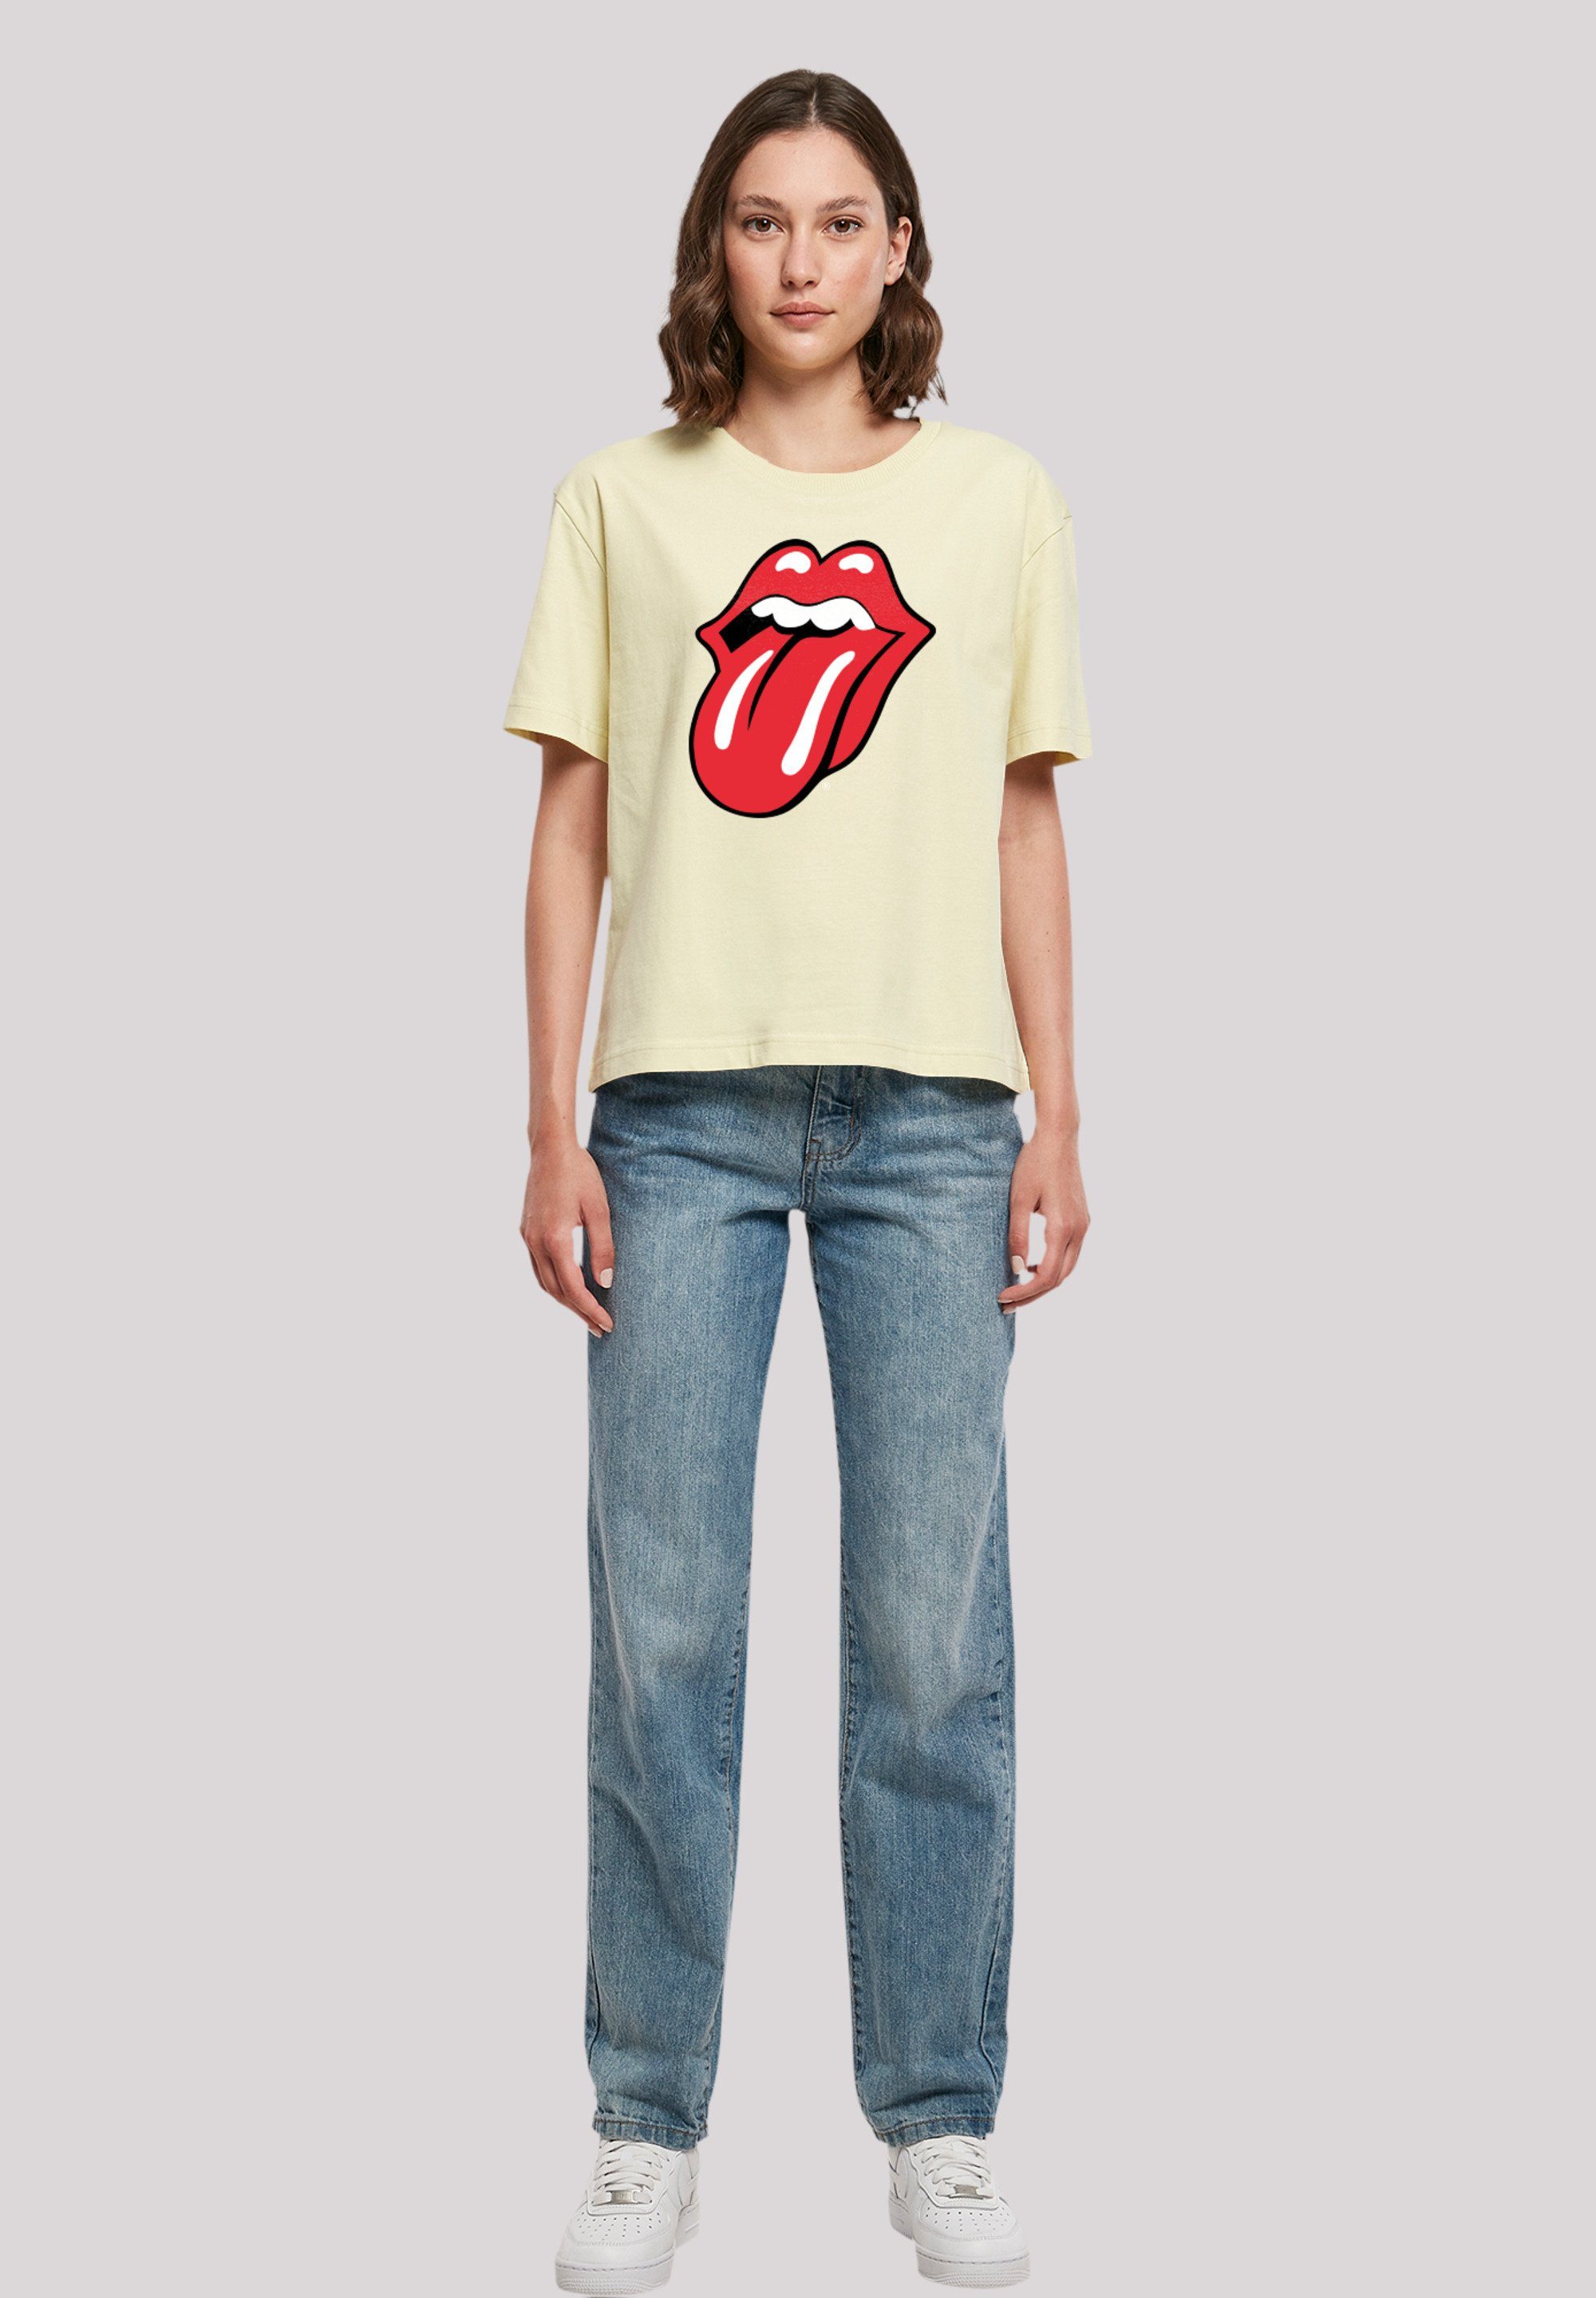 The T-Shirt Rolling Stones Print softyellow Classic Tongue F4NT4STIC